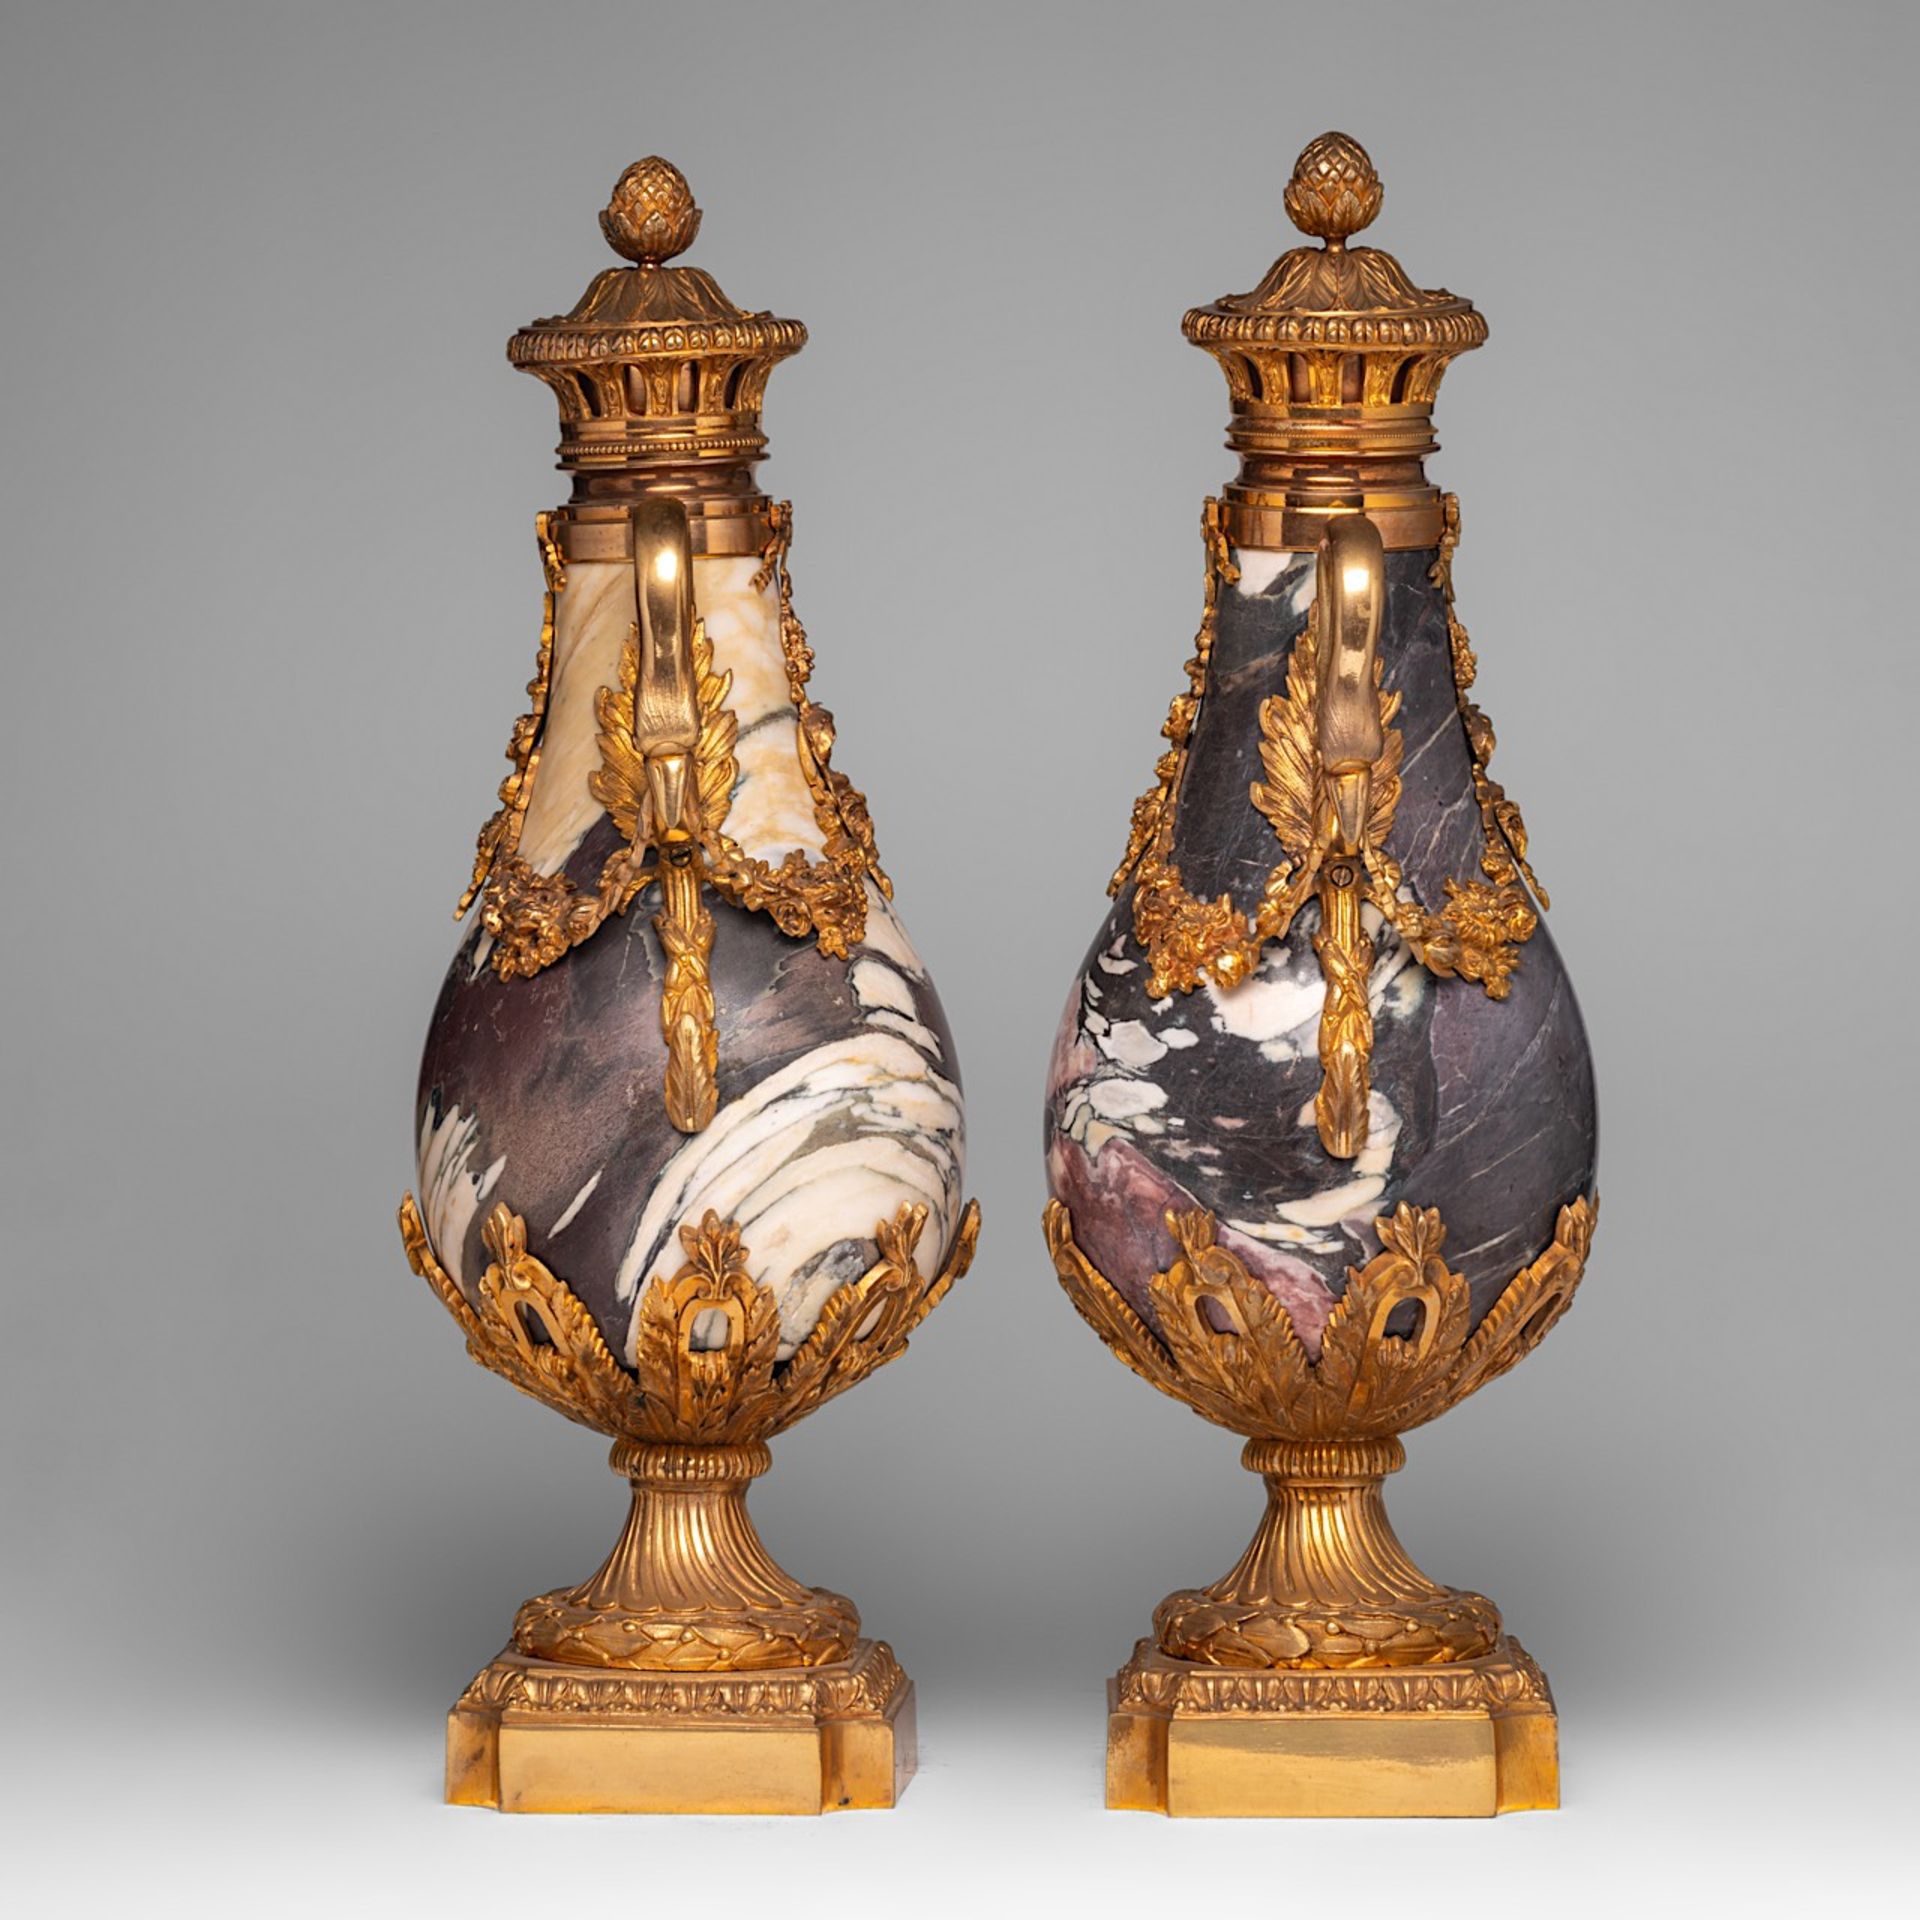 A pair of Neoclassical marble cassolettes with gilt bronze mounts, H 55 cm - Image 2 of 4